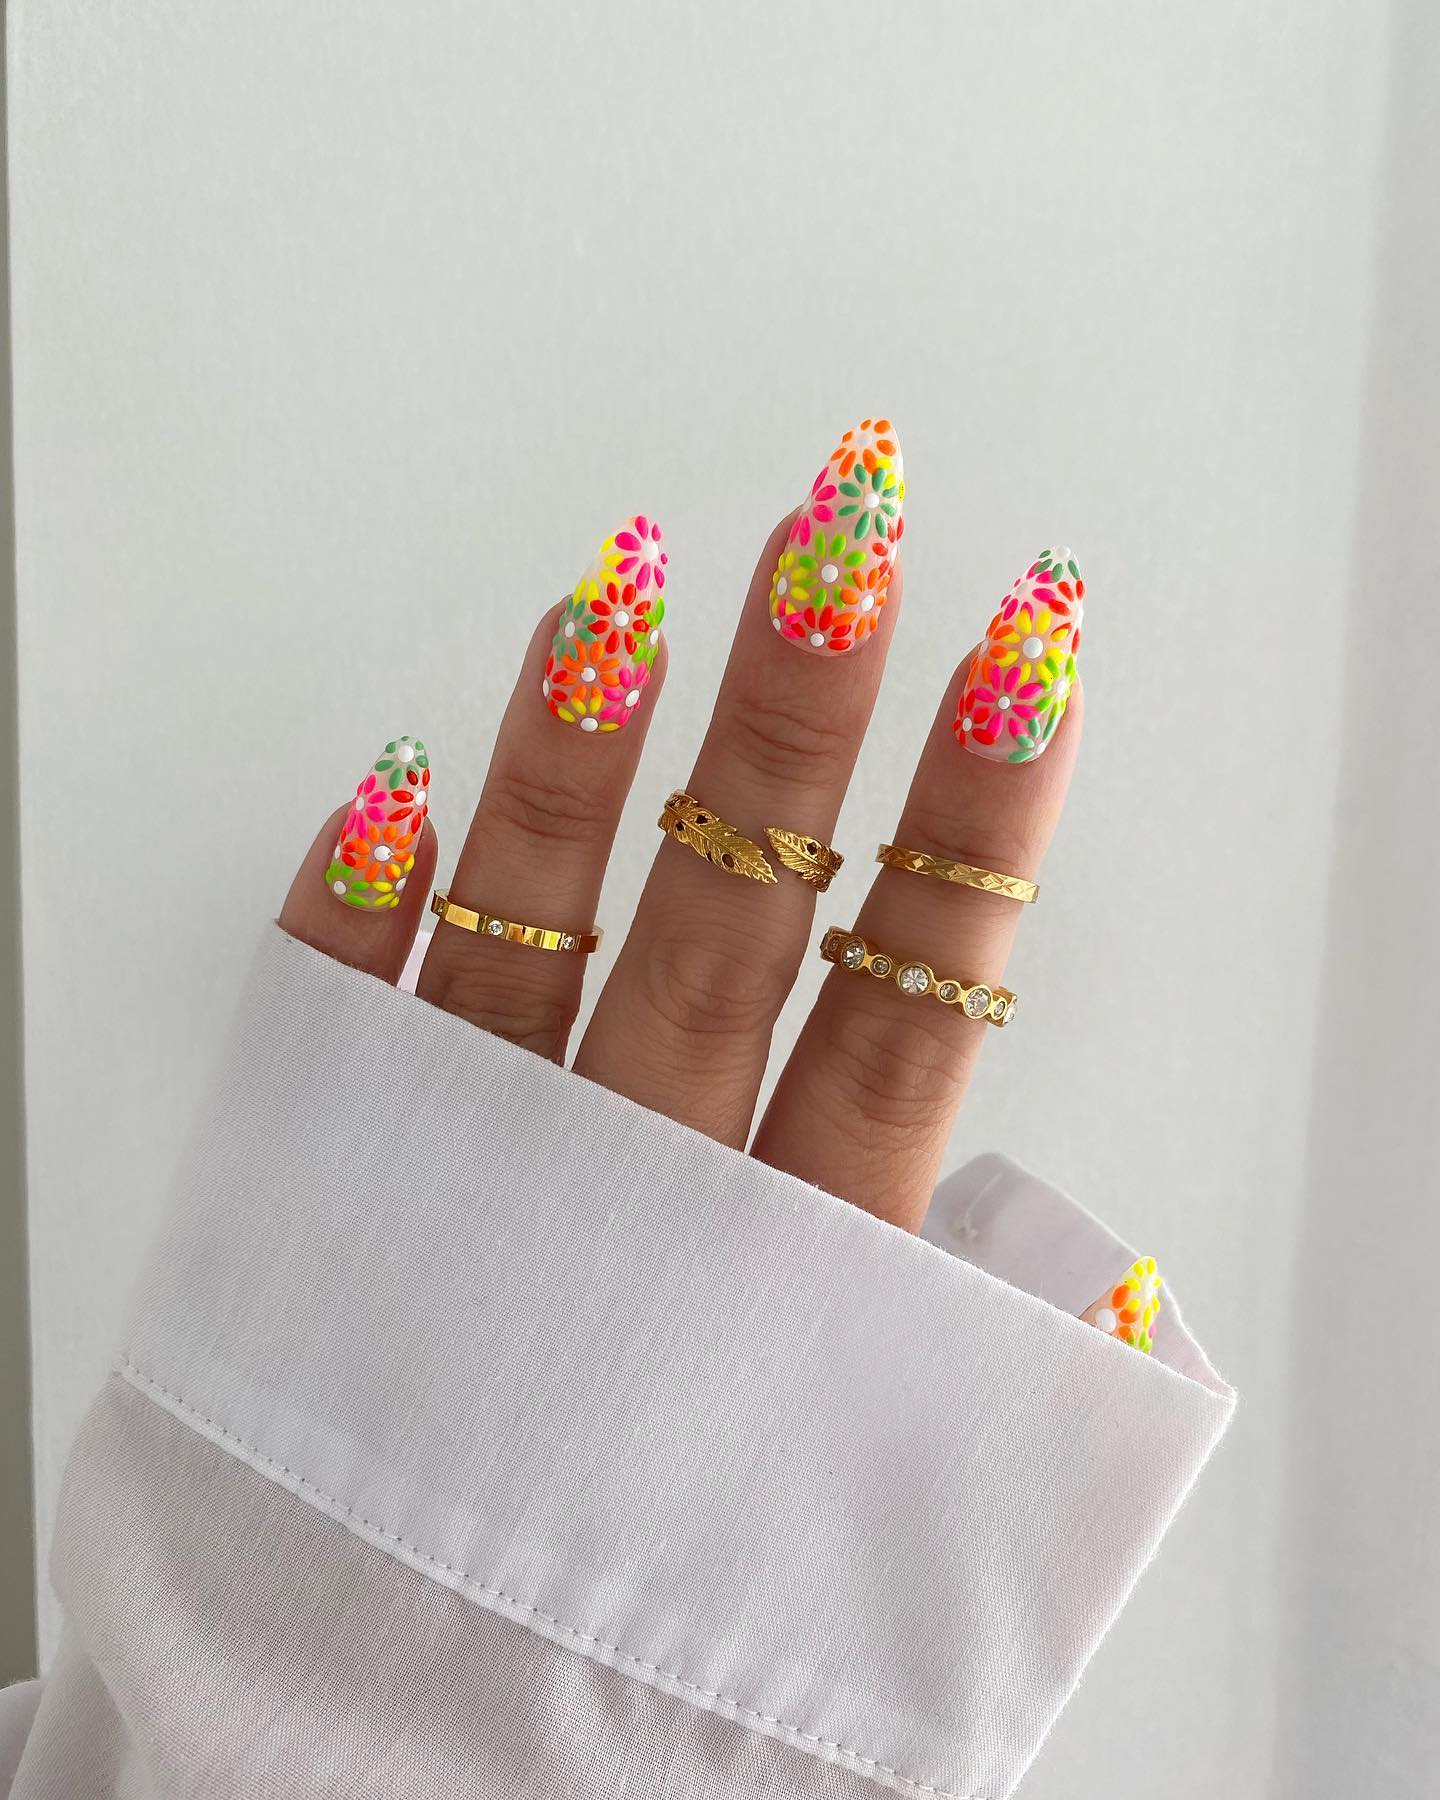 Wanna have a perfect nail design for summer? A mixture of summer colors with dense daisies is absolutely amazing!